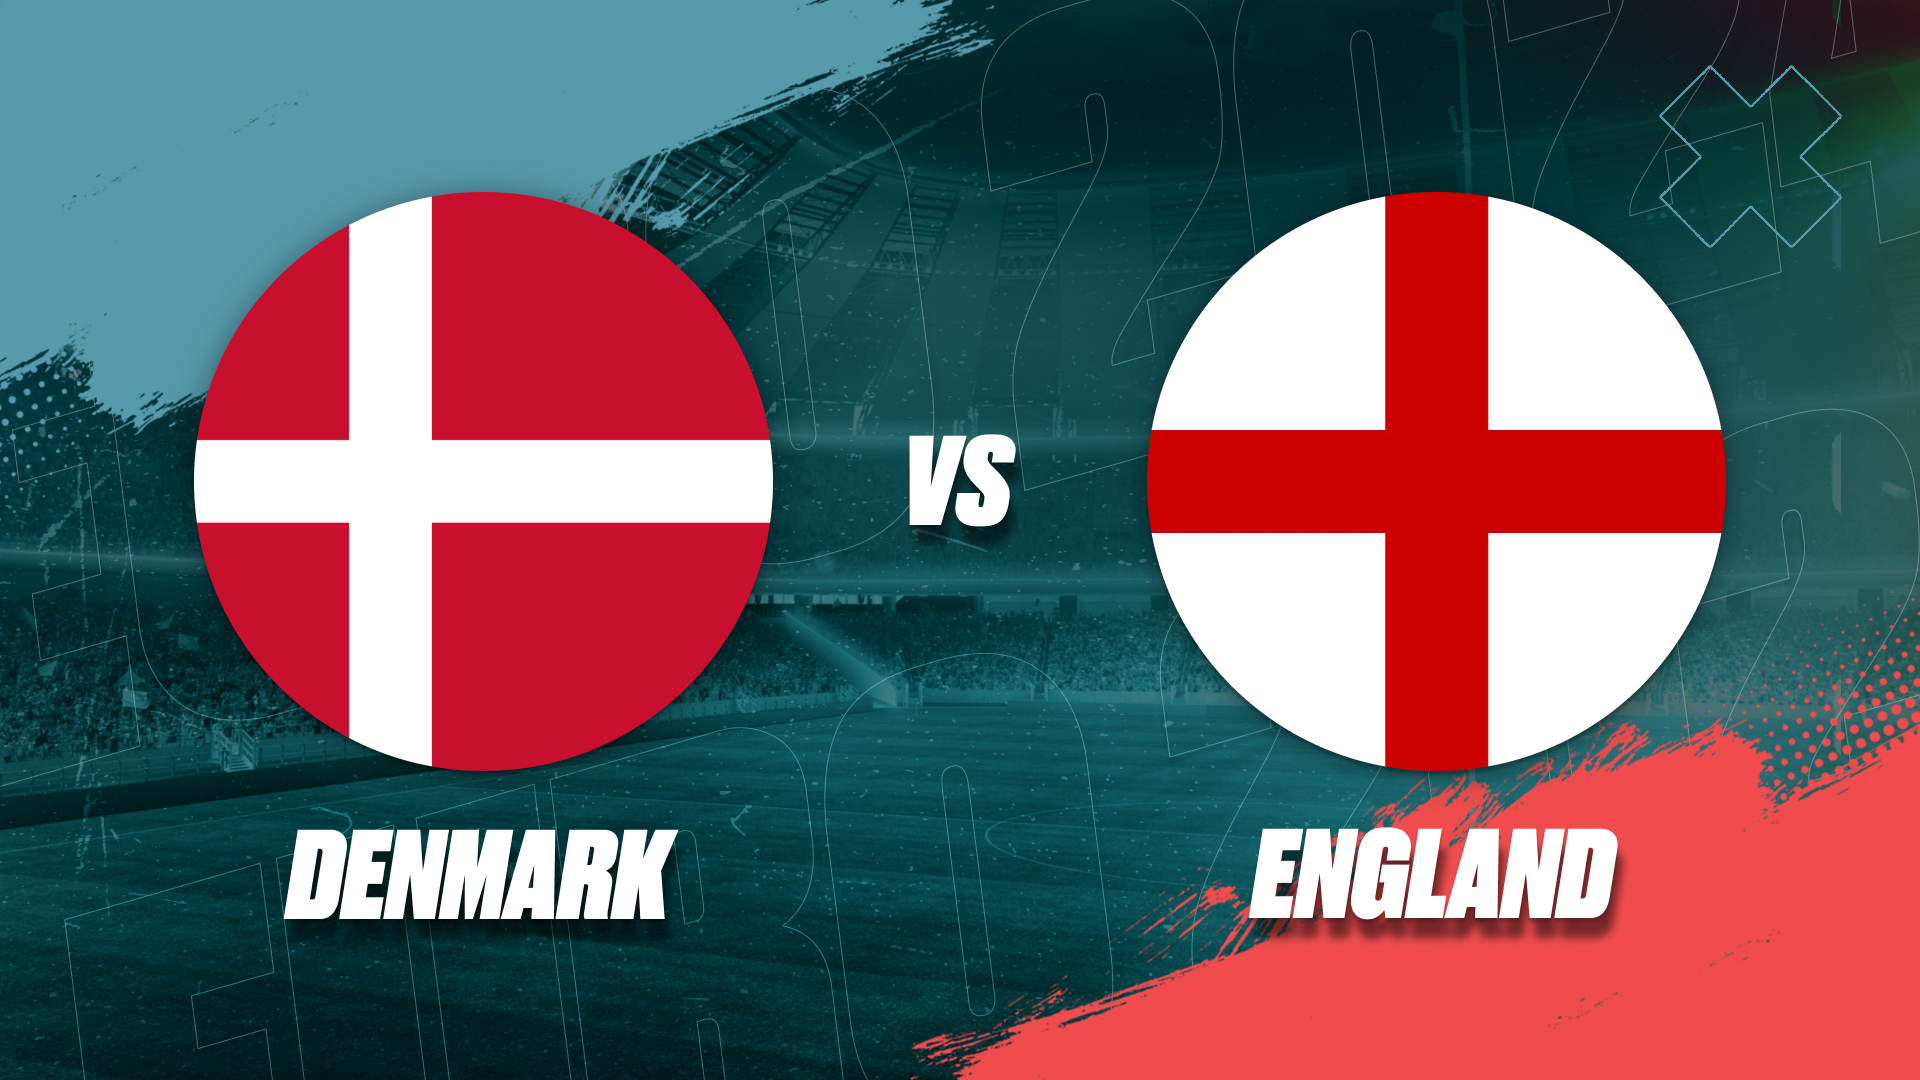 England’s Draw Against Denmark: A Reality Check for the Three Lions